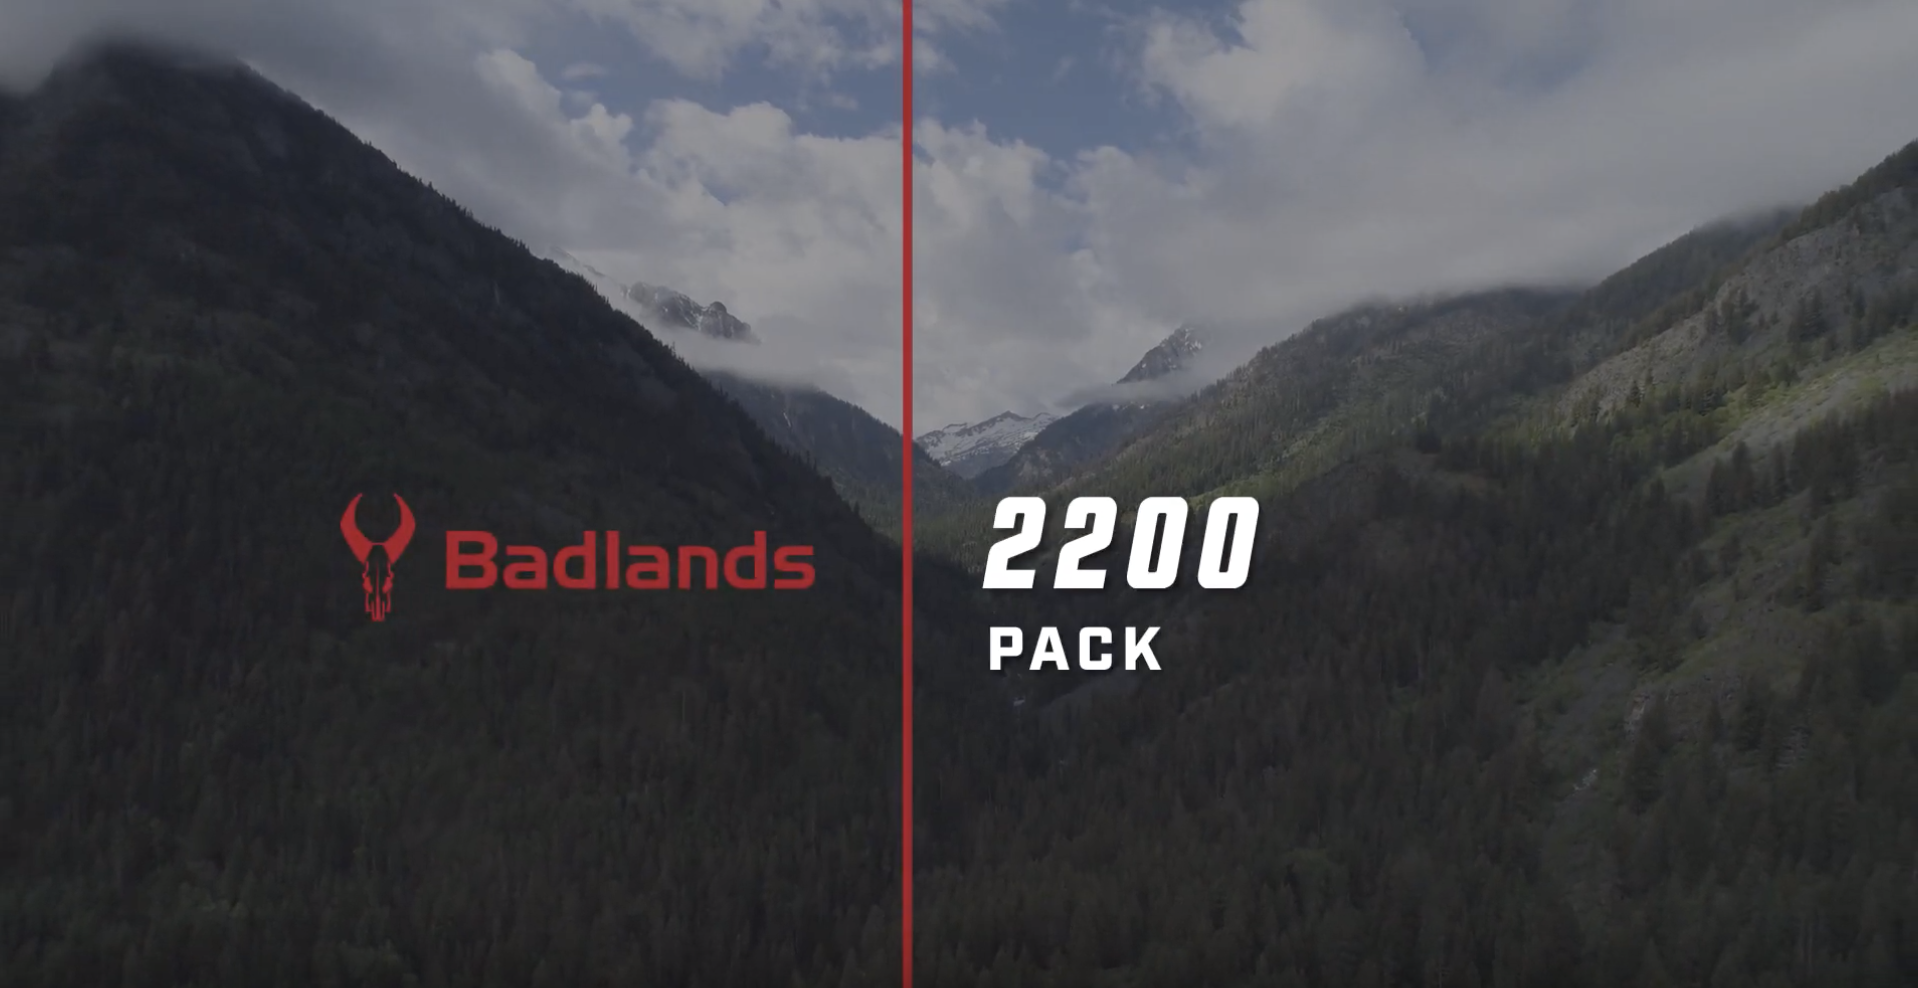 Learn more about the 2200 Pack